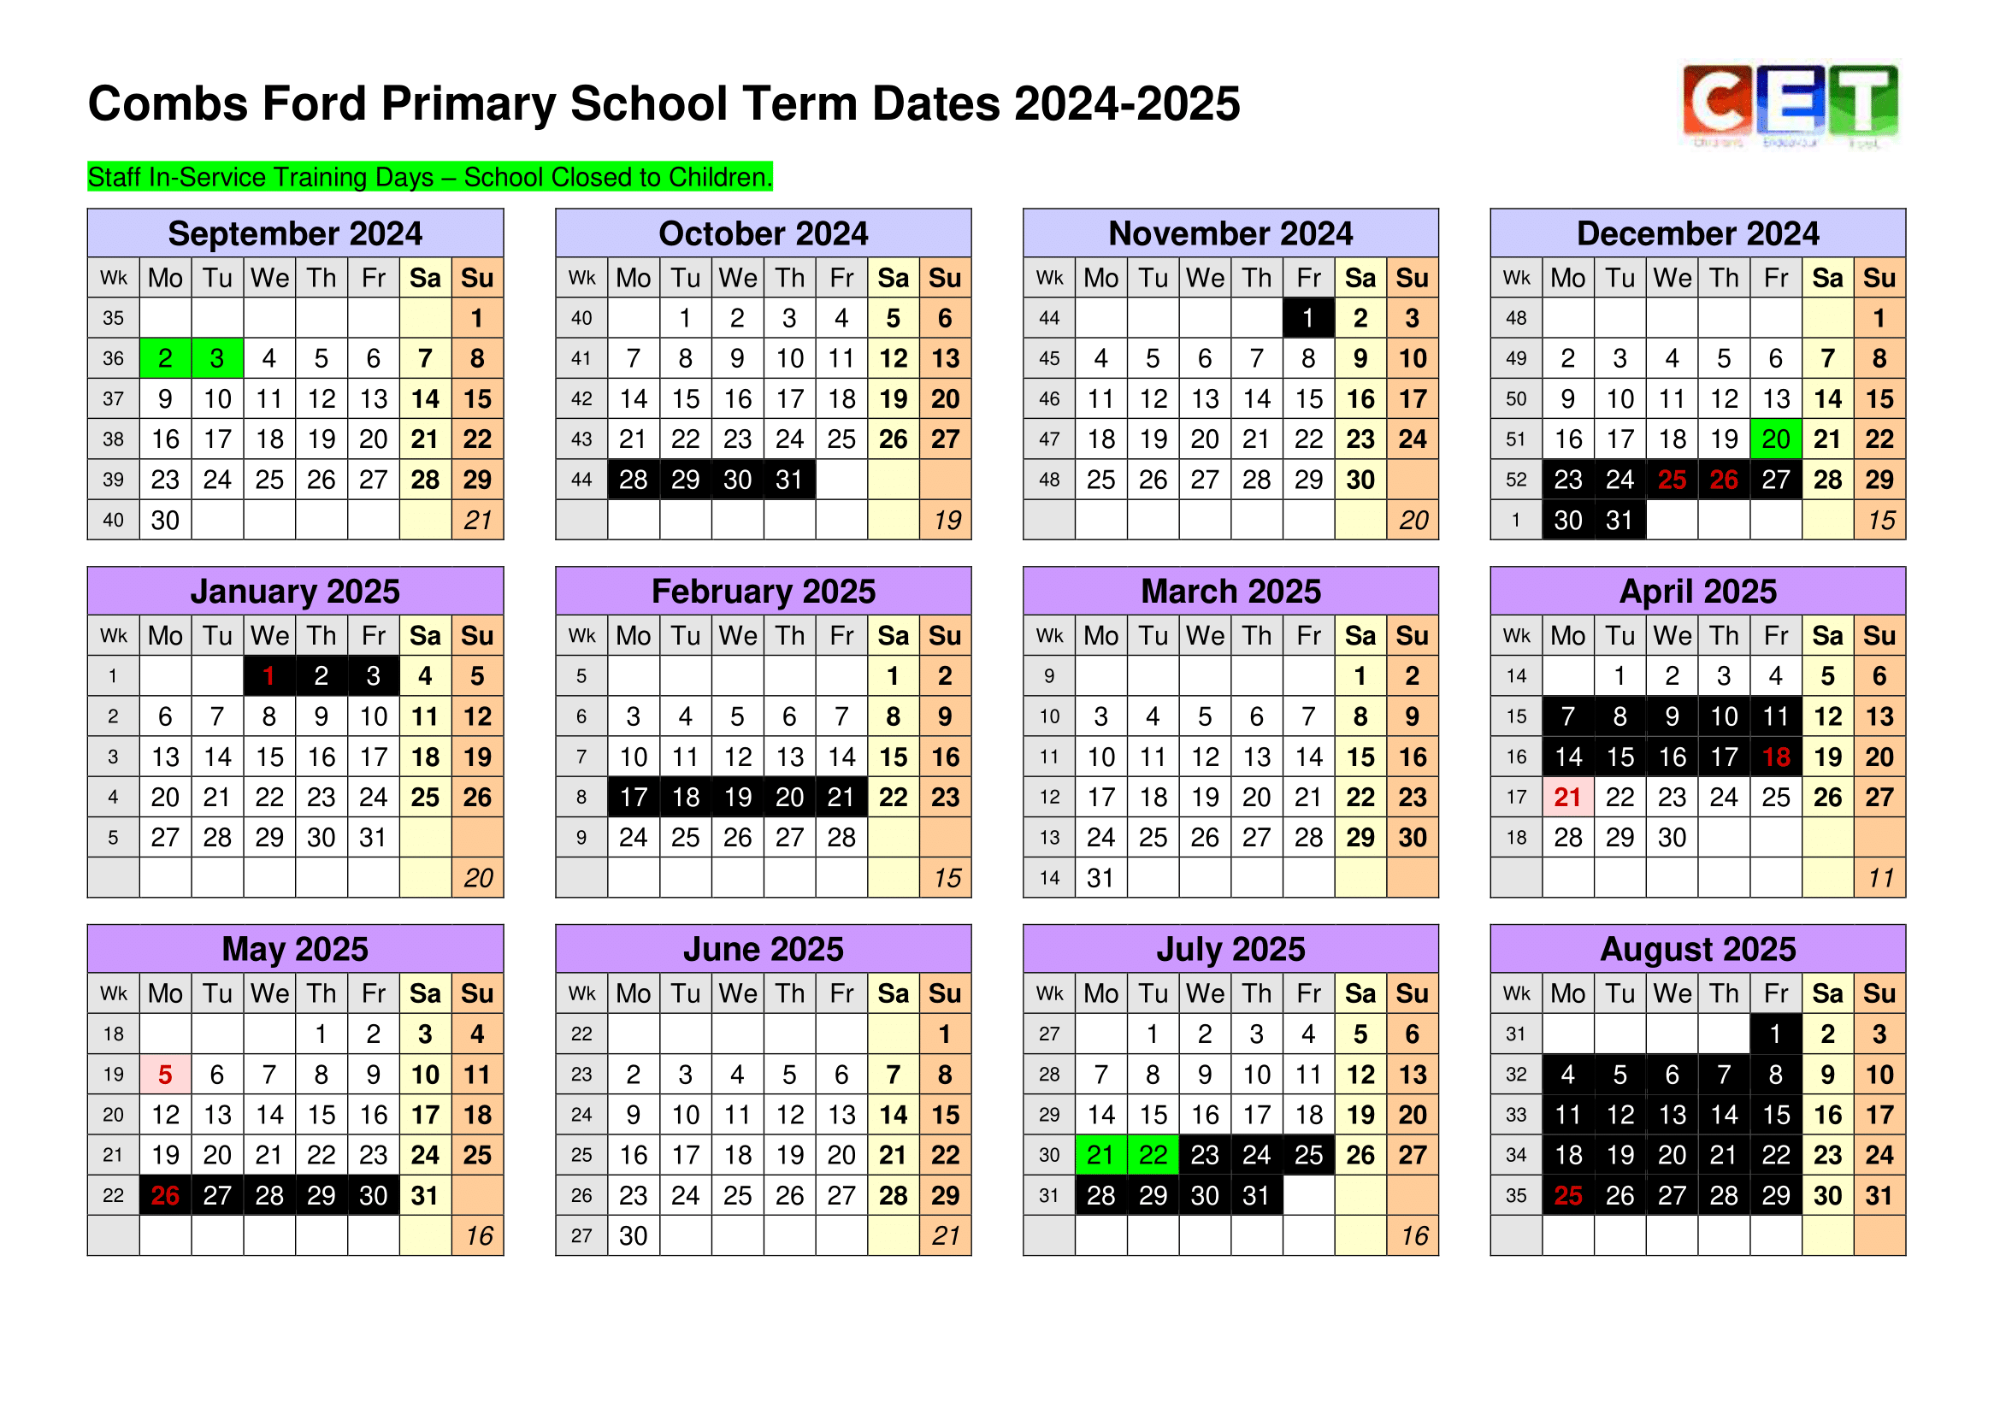 Image of Combs Ford Primary School's term dates for the academic year 2024-2025.